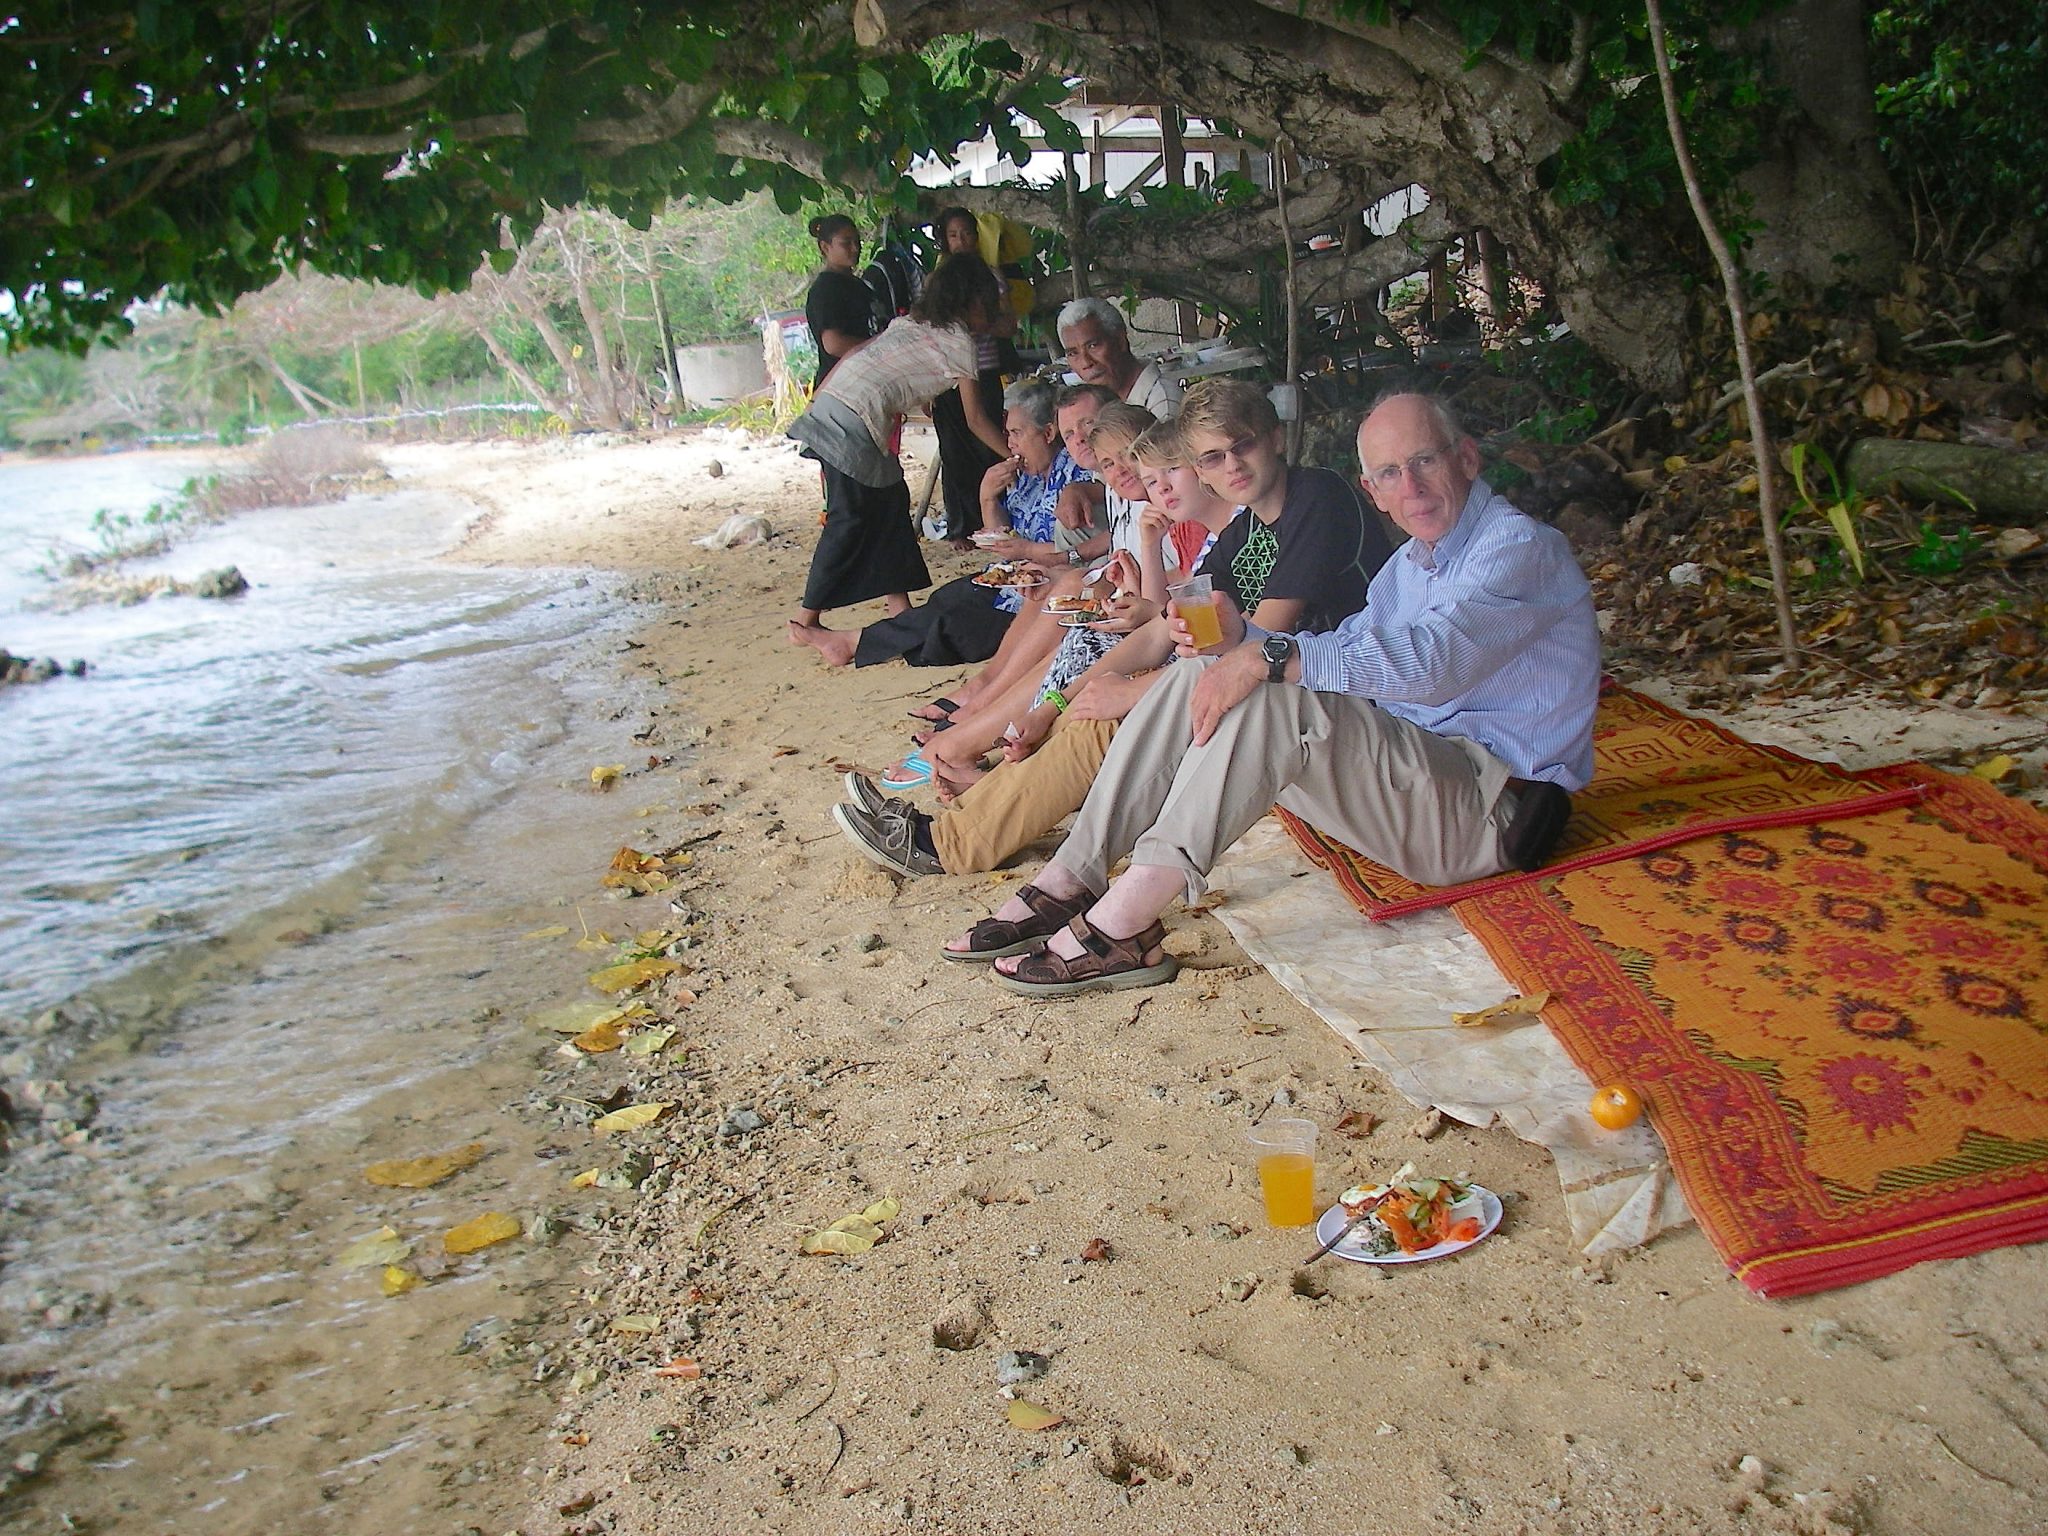 44. A kind Tongan family we knew from the school where I gave the art lesson invited us and another sailing missionary family to their home for a traditional Tongan feast. Whales and their calves were commonly seen in front of their house.